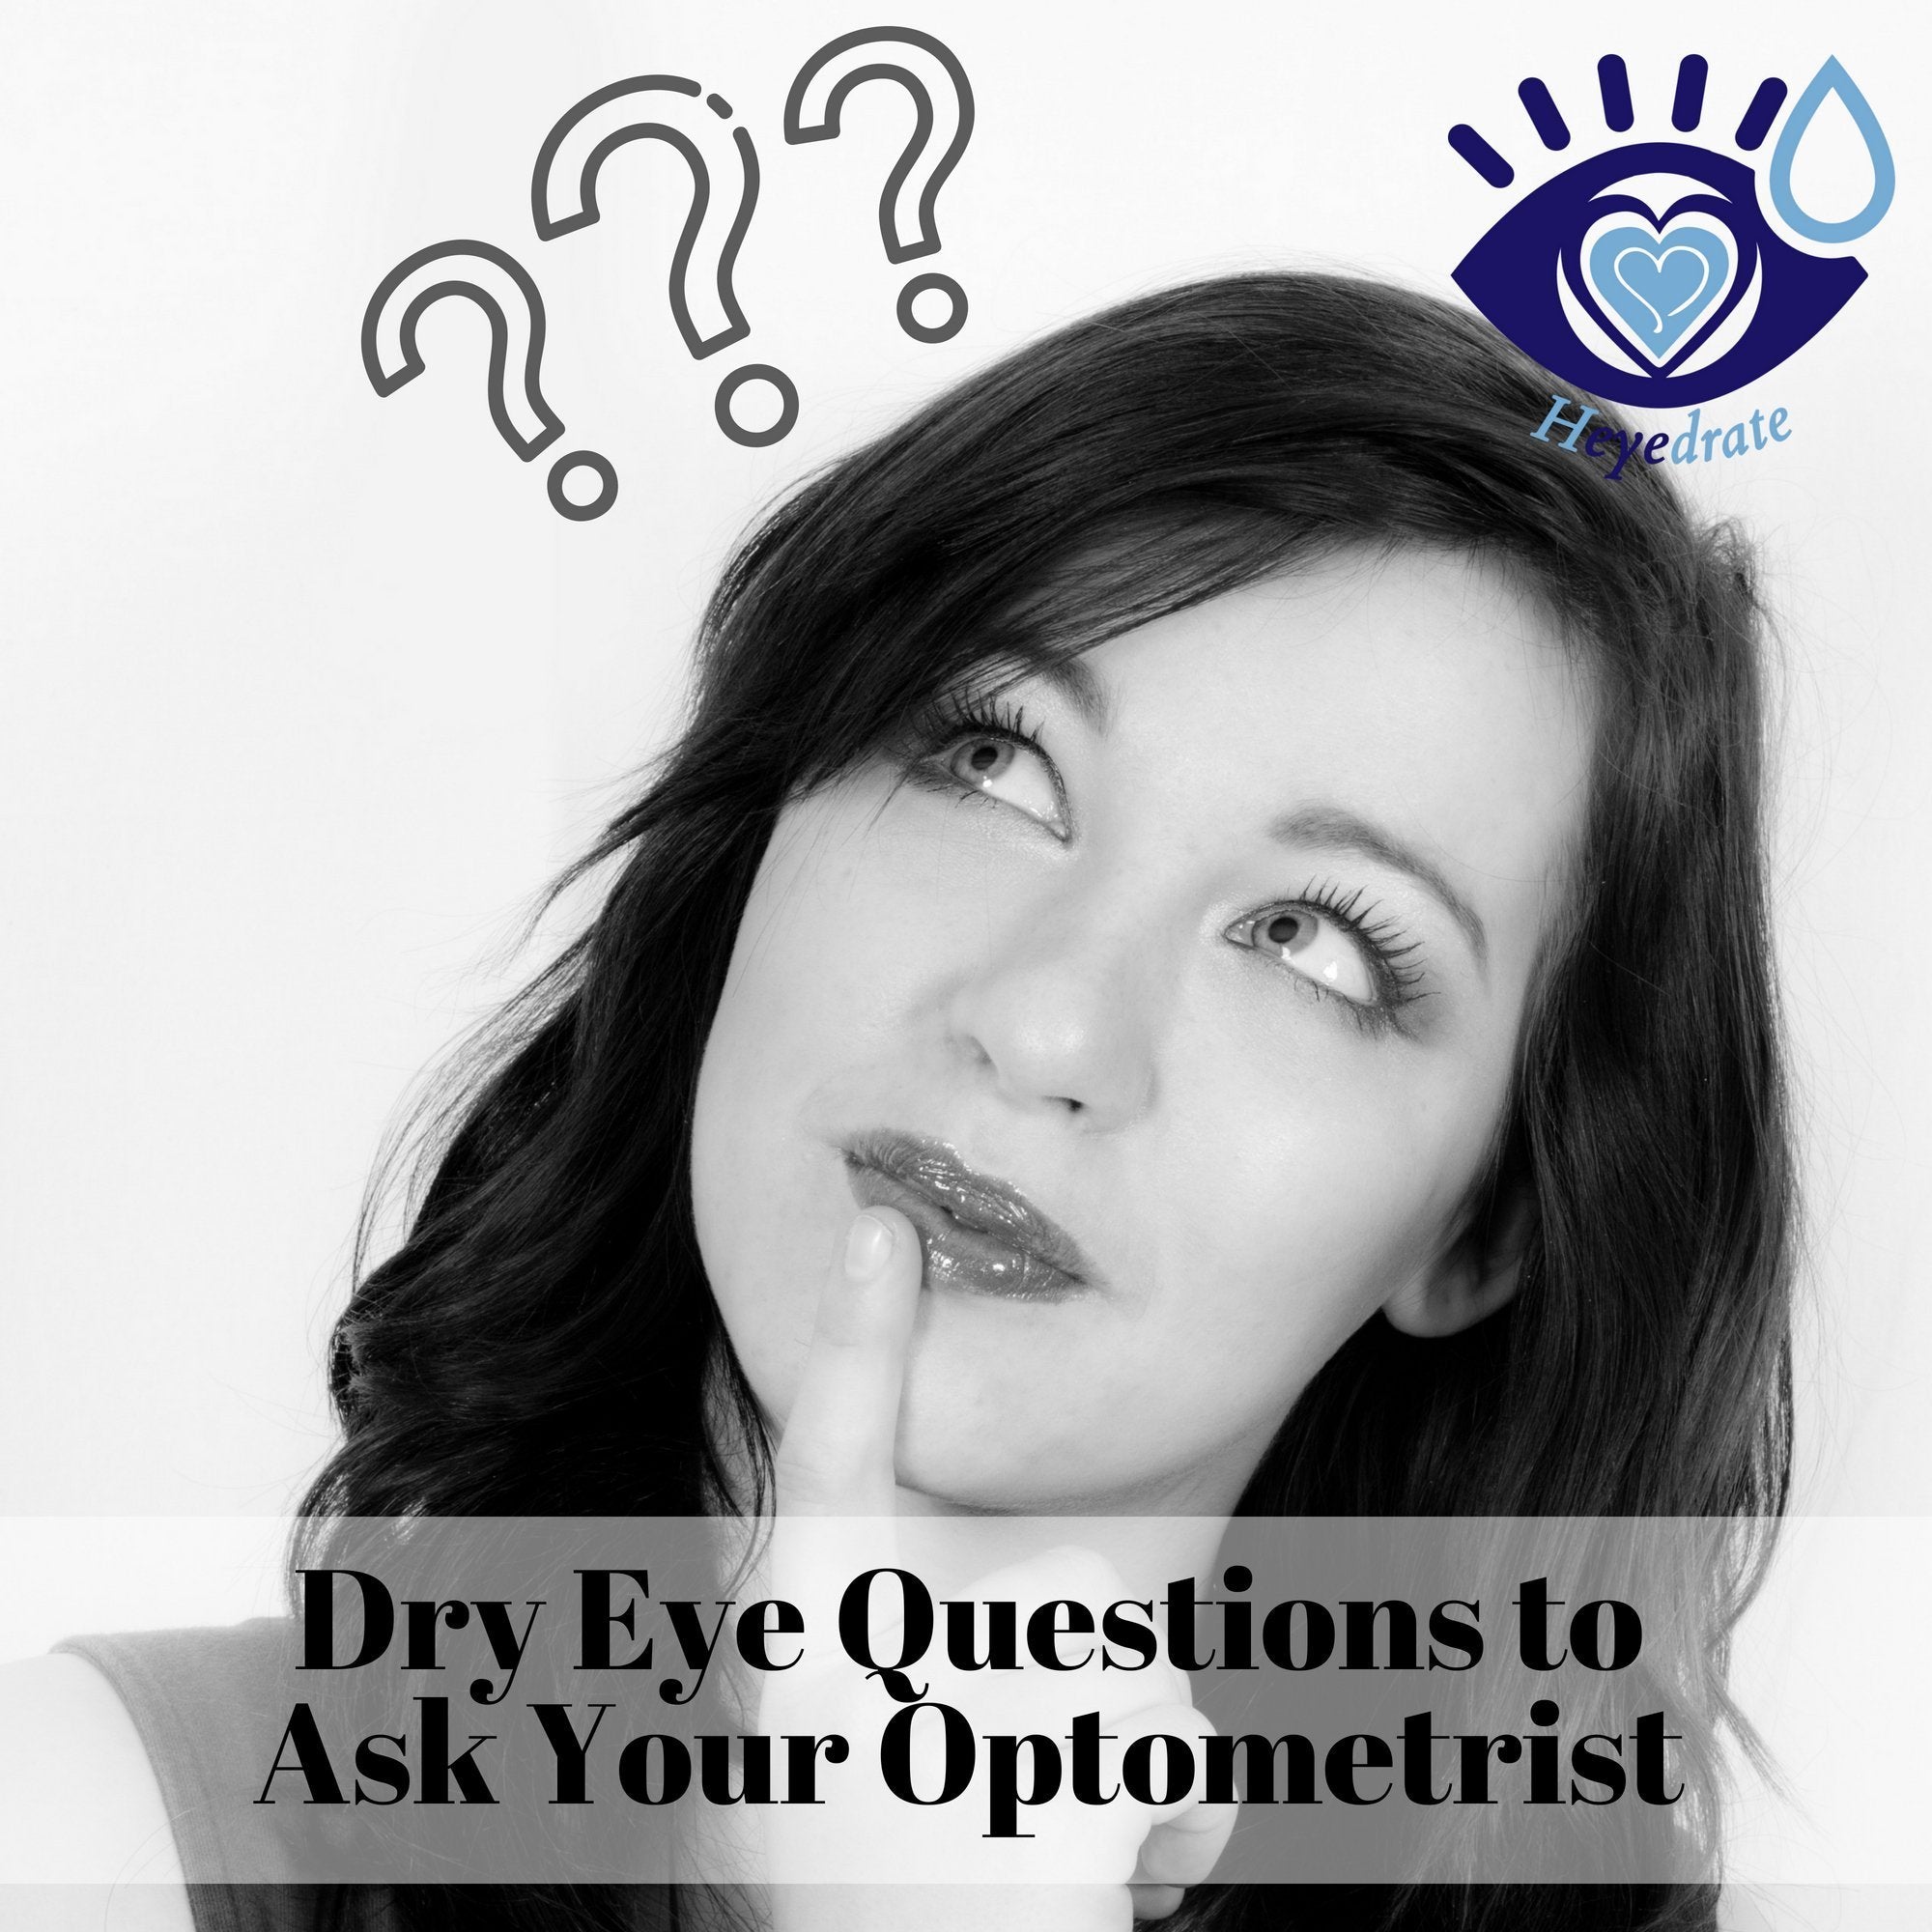 Dry Eye Questions to Ask Your Optometrist